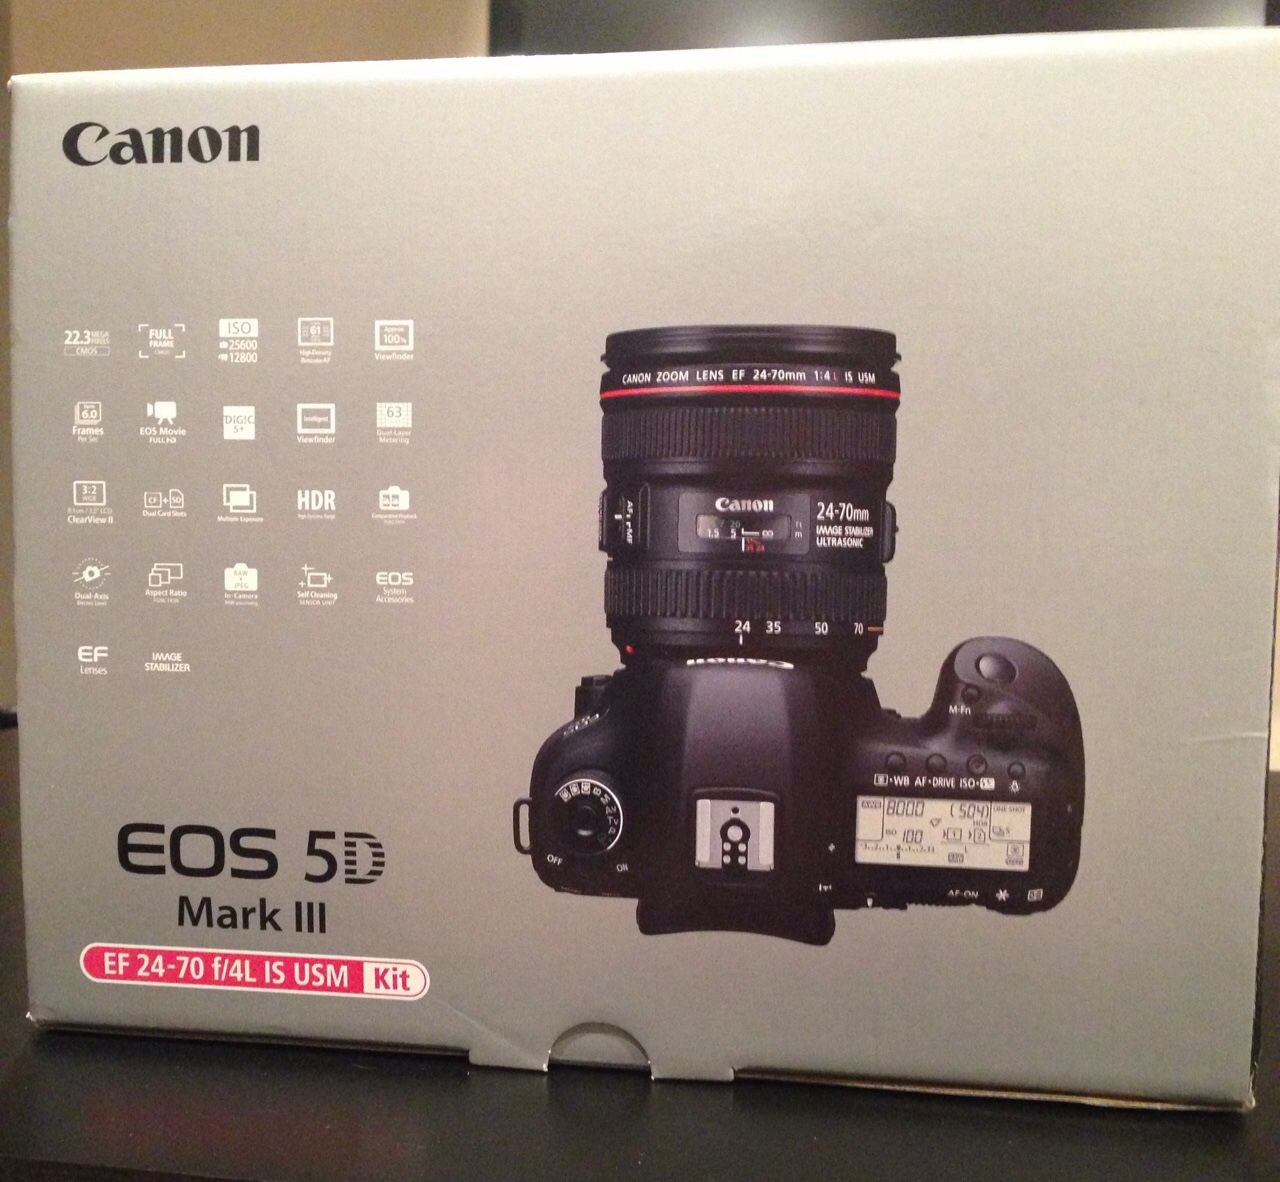 Brand new Canon EOS 5D mark III , EF 24-70 f/4L IS USM (KIT) Never used with box , brand new